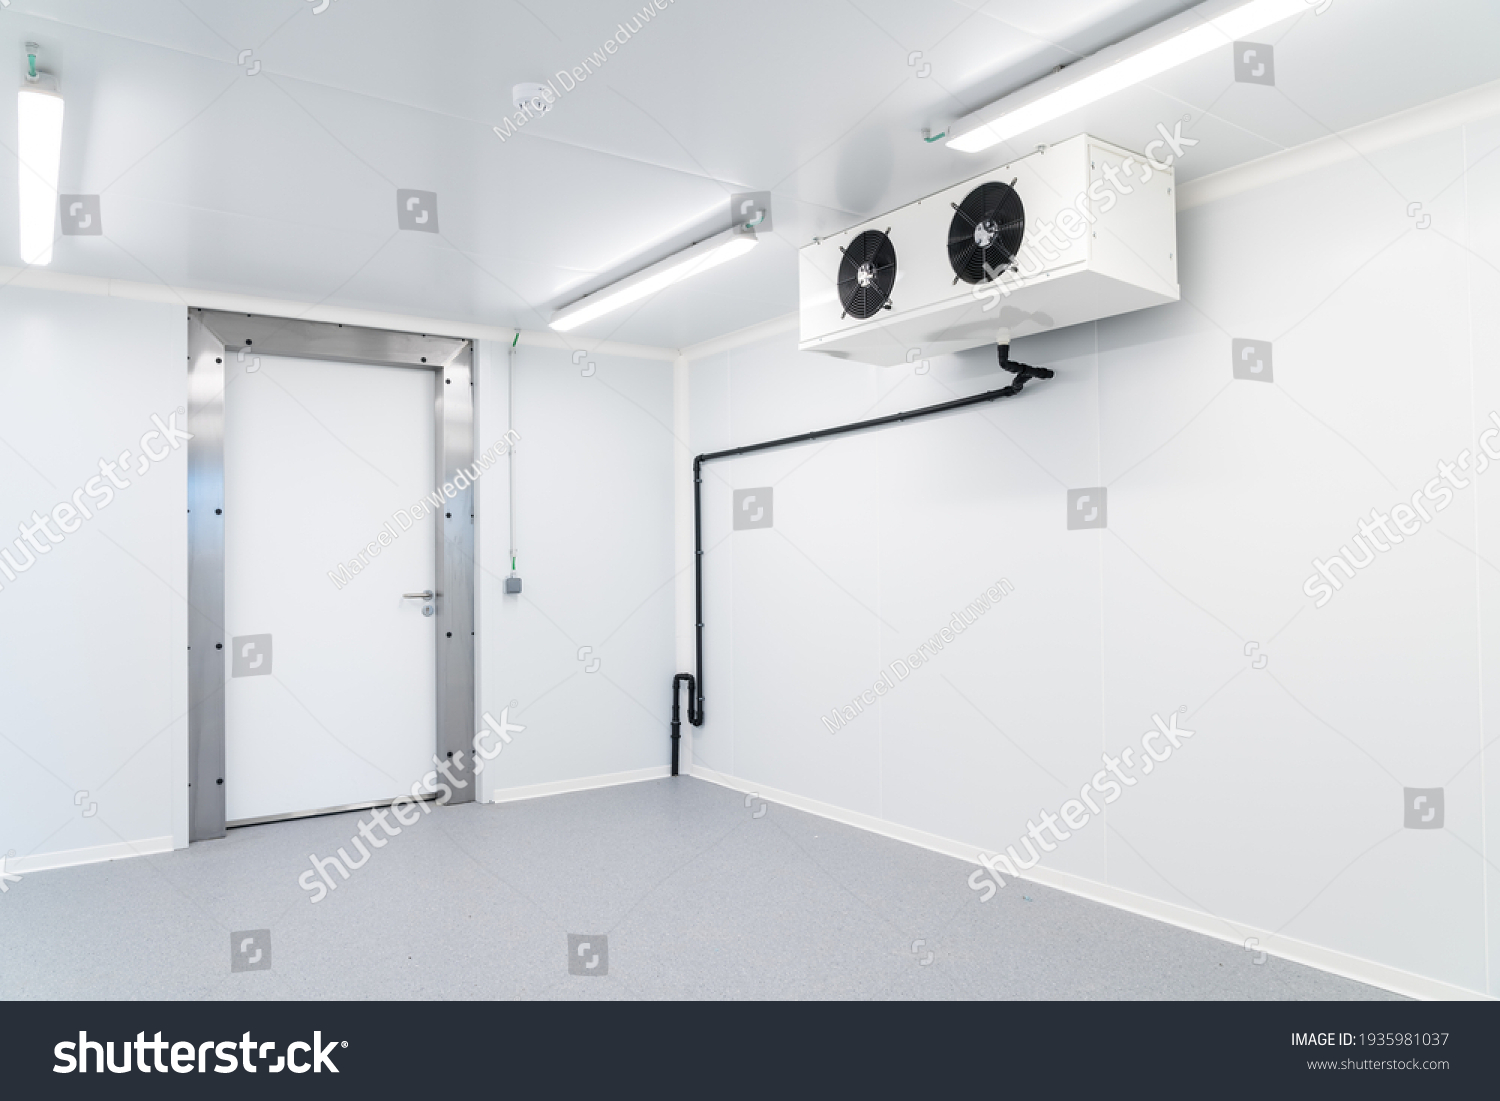 an empty industrial room refrigerator with four fans #1935981037